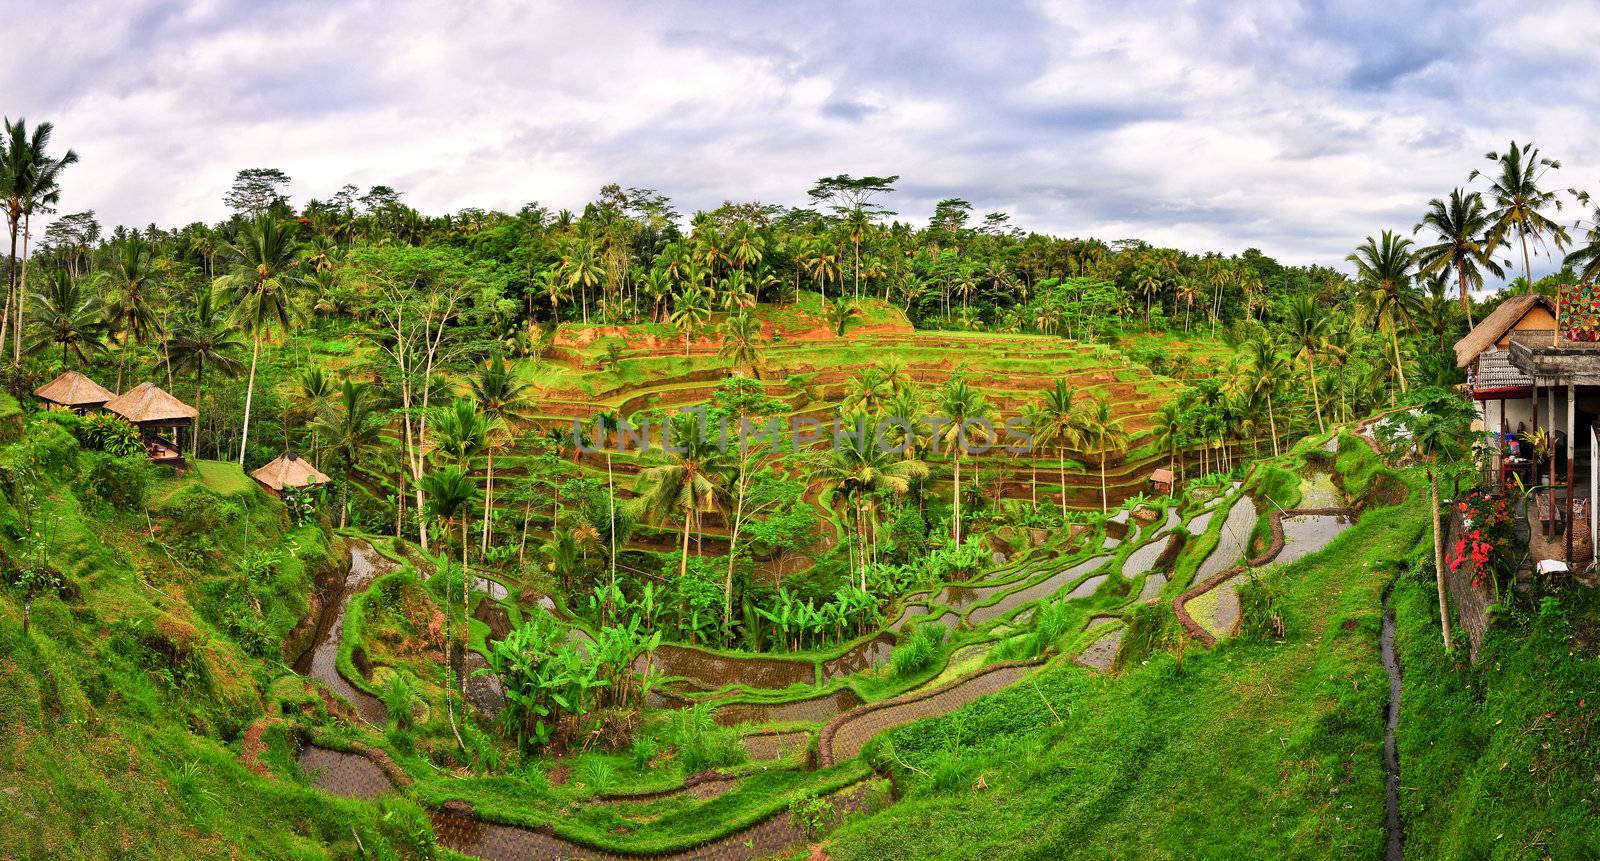 Balinese green rice fields terrace panorama by martinm303